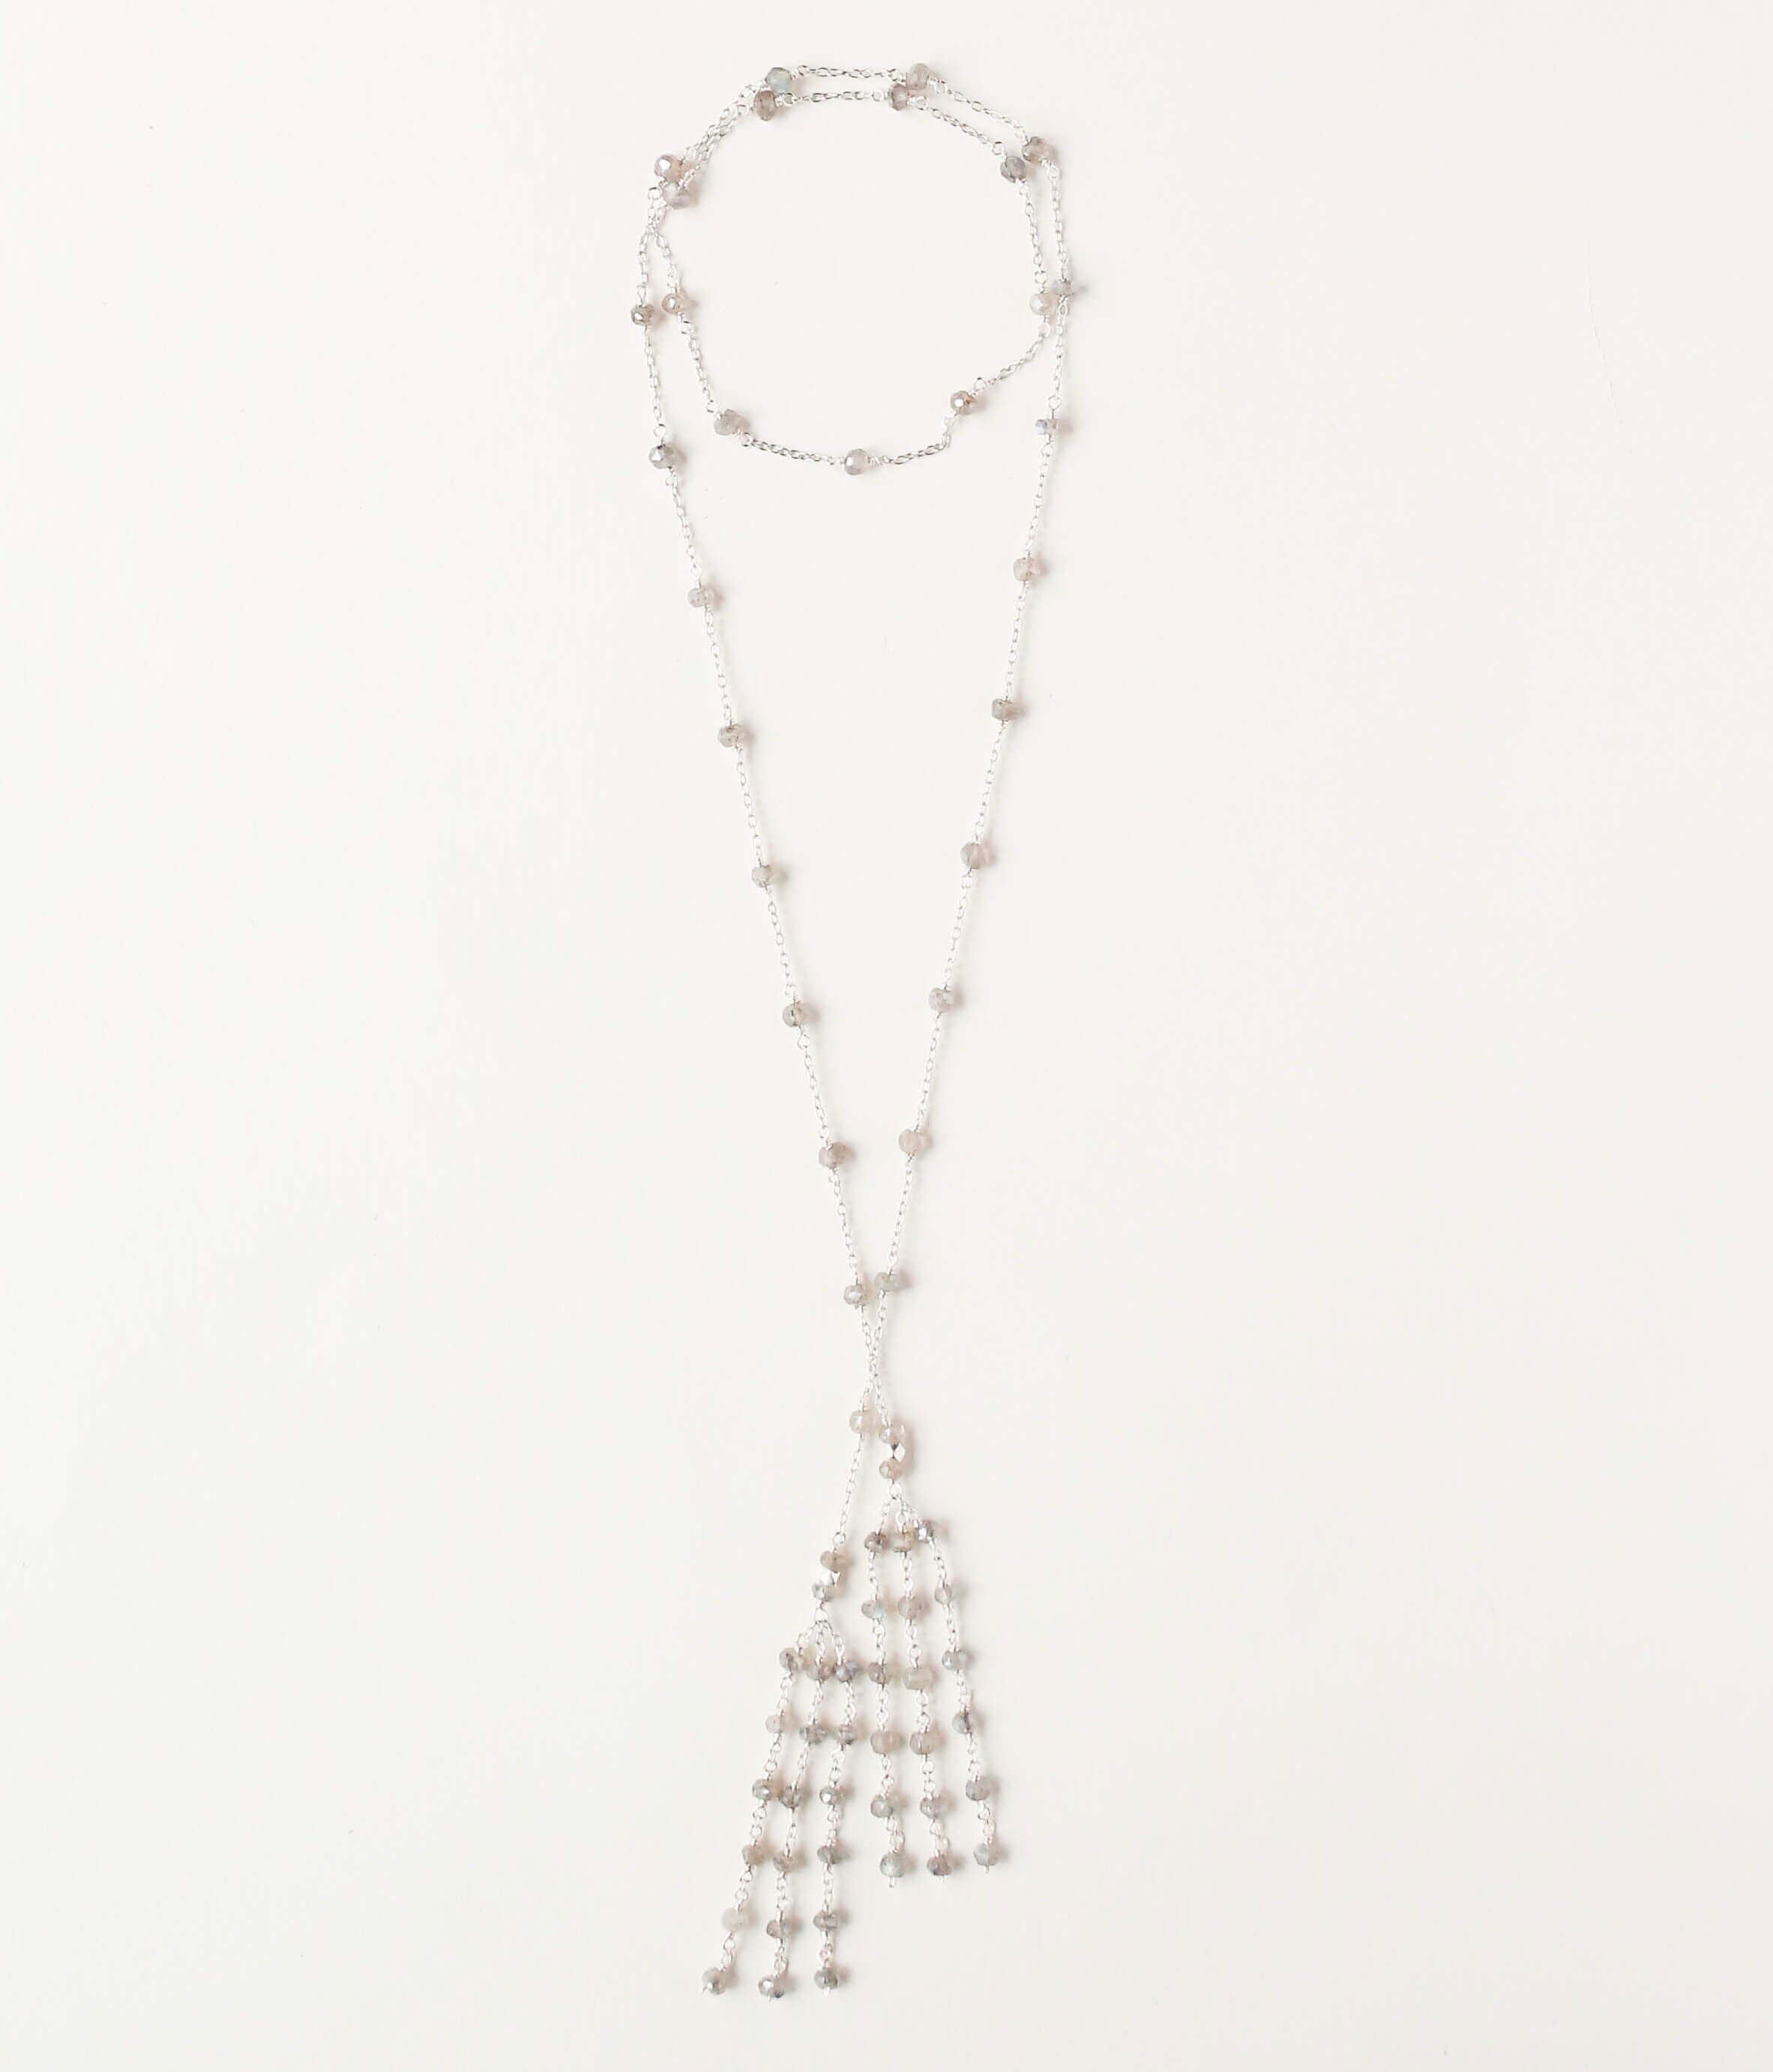 Silver plated Labradorite Lariat Necklace with a stunning tassel